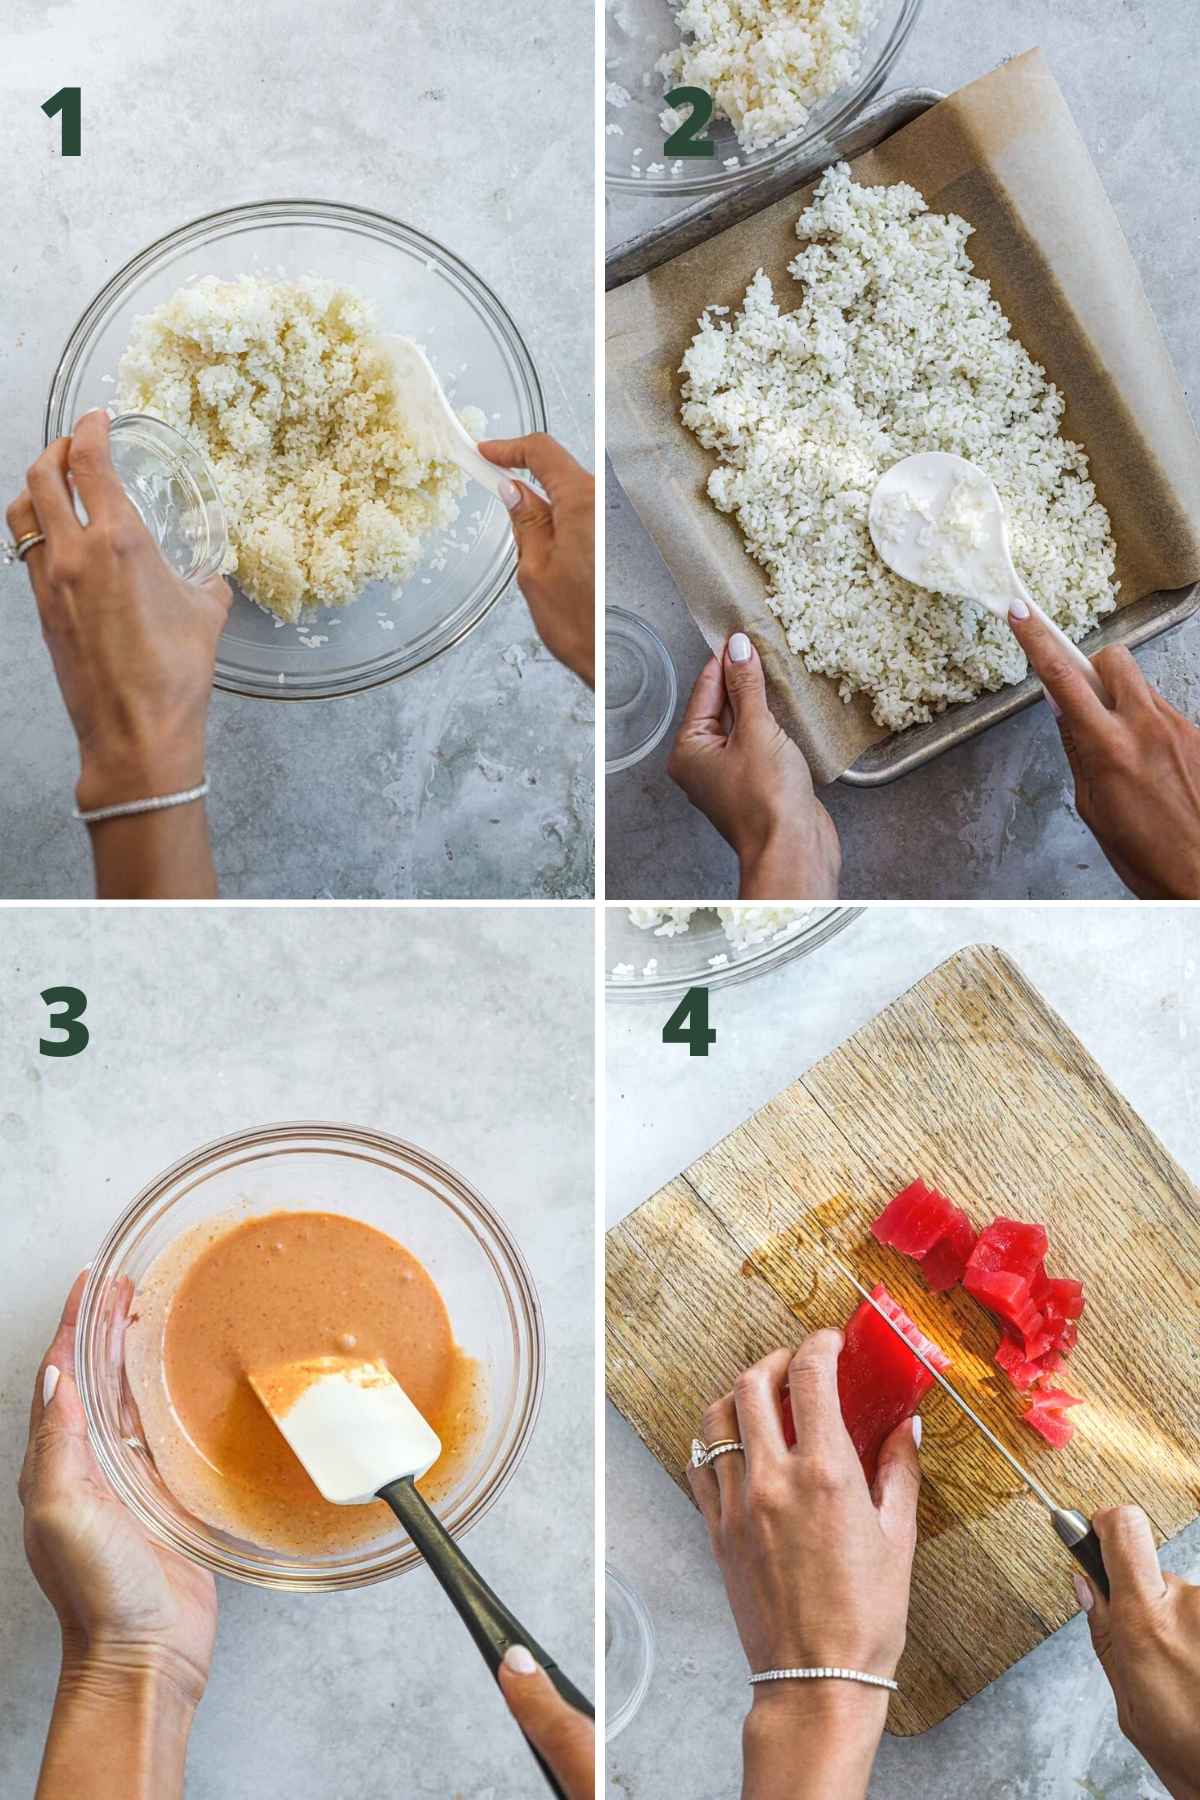 Steps to make spicy tuna with crispy rice, including making the sushi rice and spreading it in a pan, making the spicy kewpie mayo, and mincing the tuna.